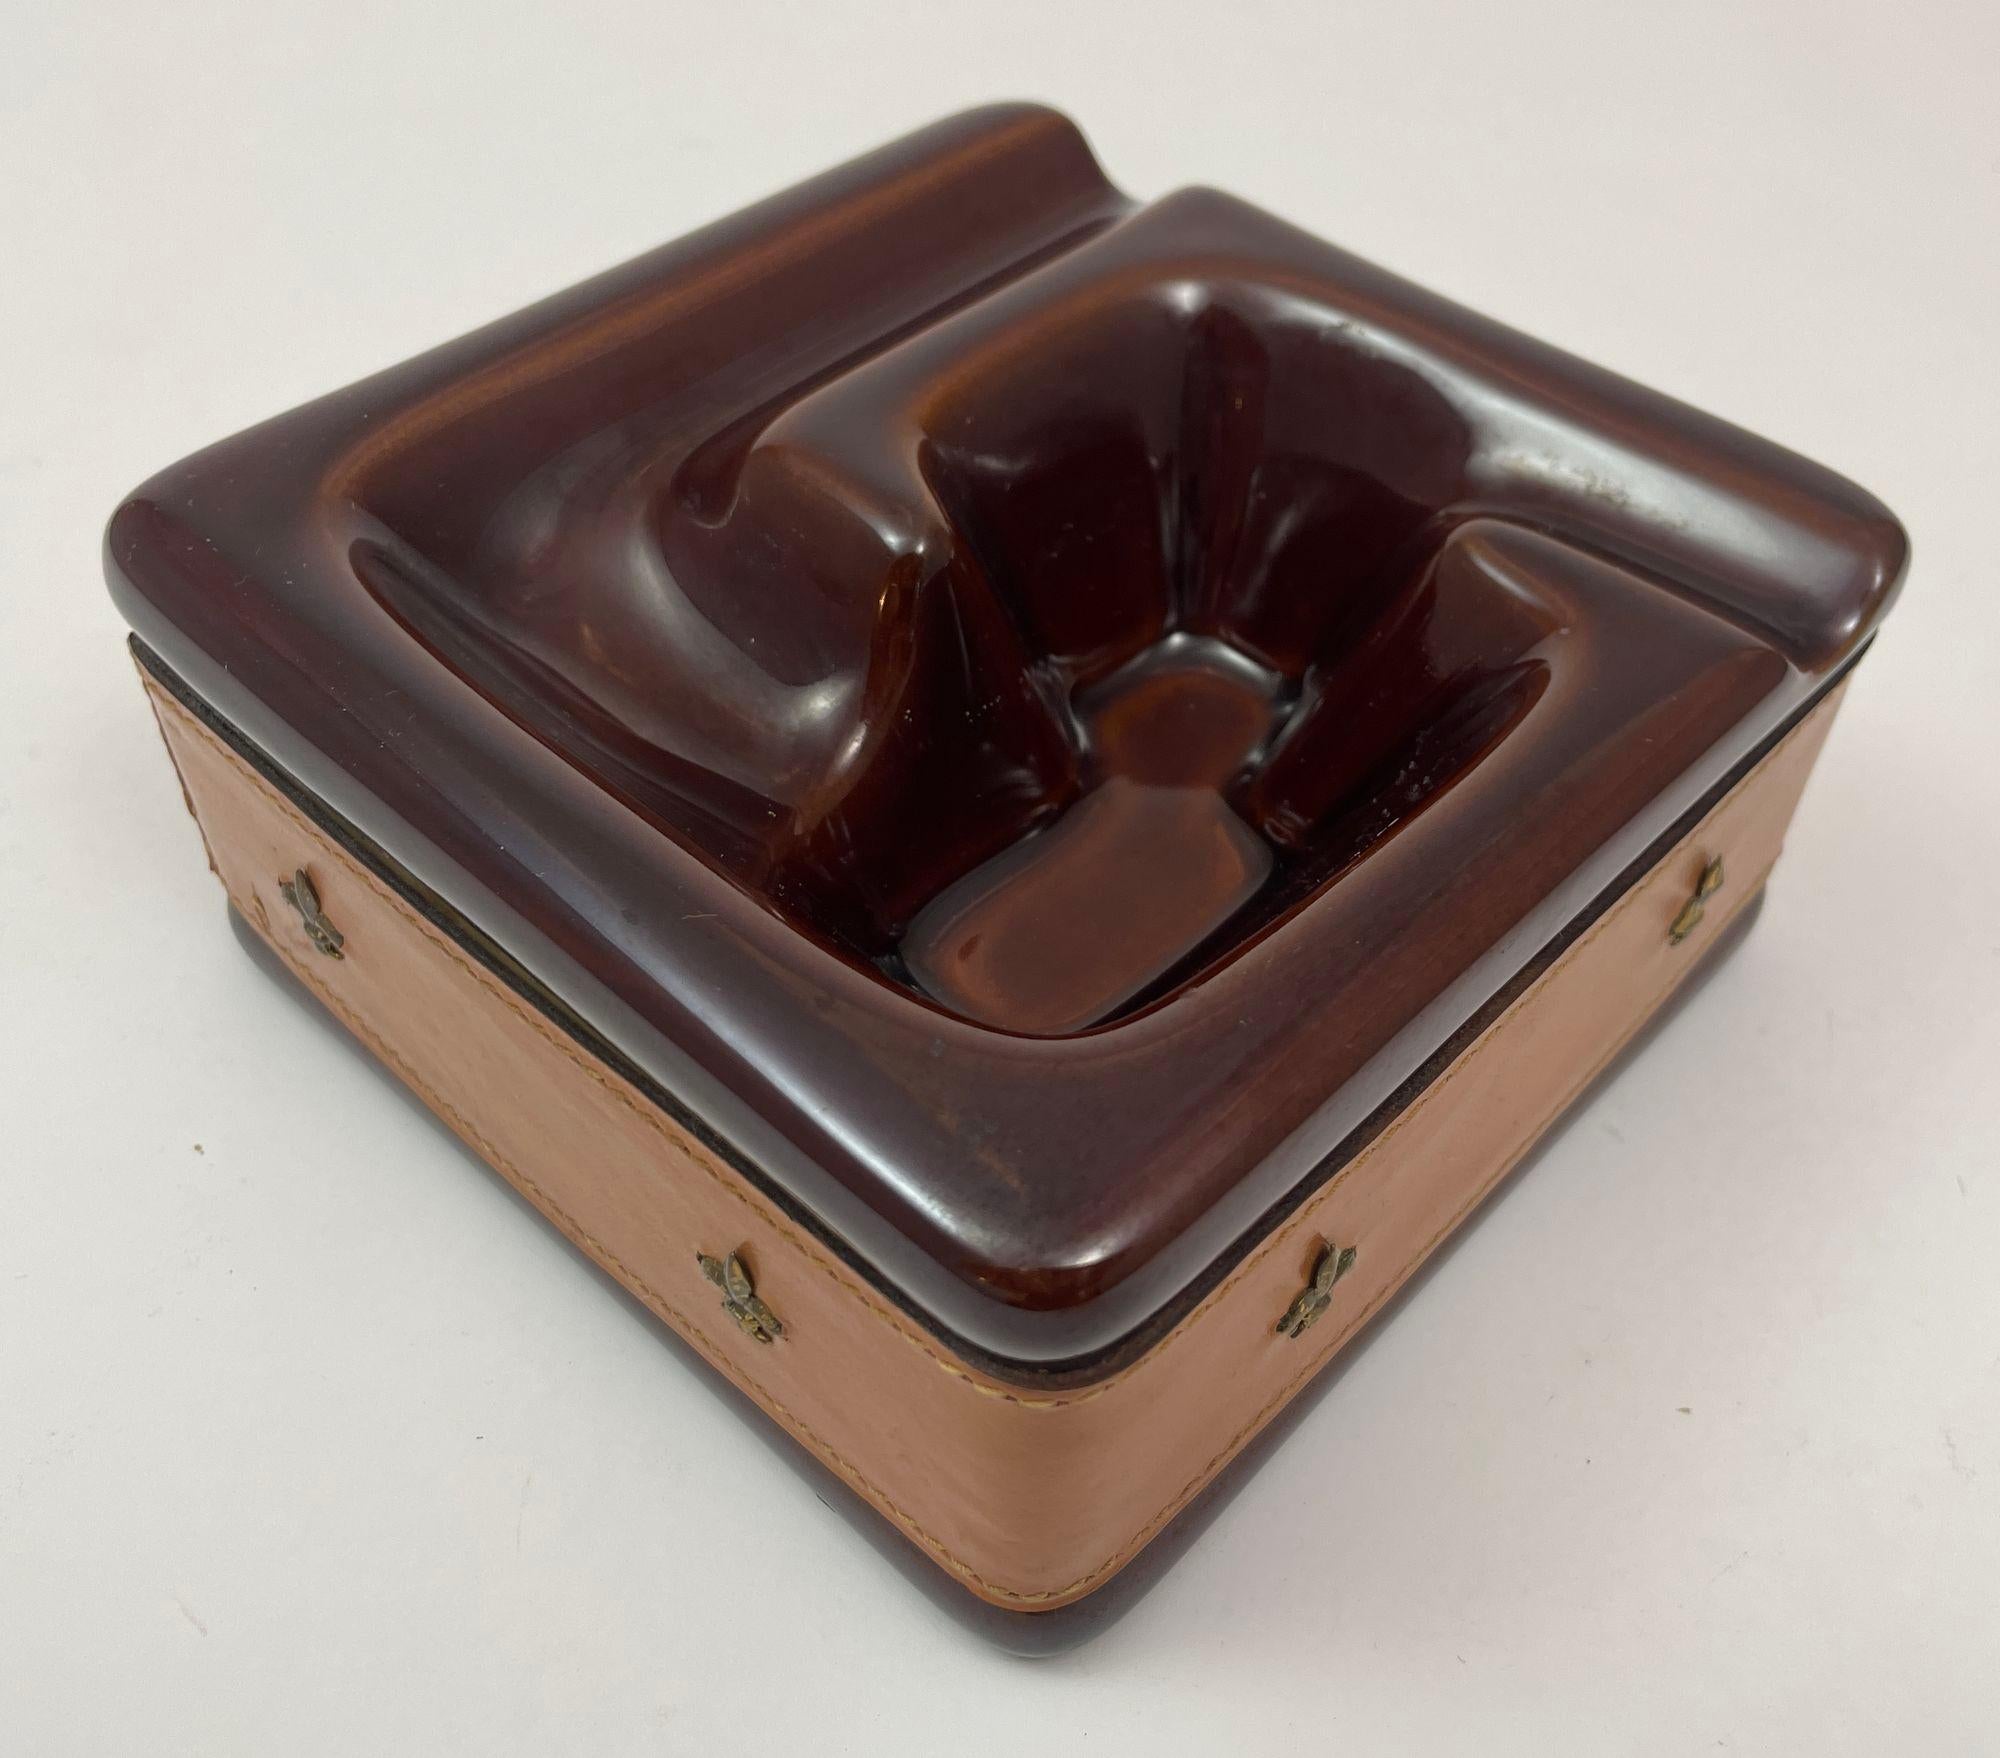 Vintage brown ceramic cigar or pipe ashtray wrapped in saddle leather with contrast stitching and brass fleur de lys decor.
Perfect saddle leather ashtray catchall vide poche or just use it as a great sculptural decorative piece dish.
Dimensions of